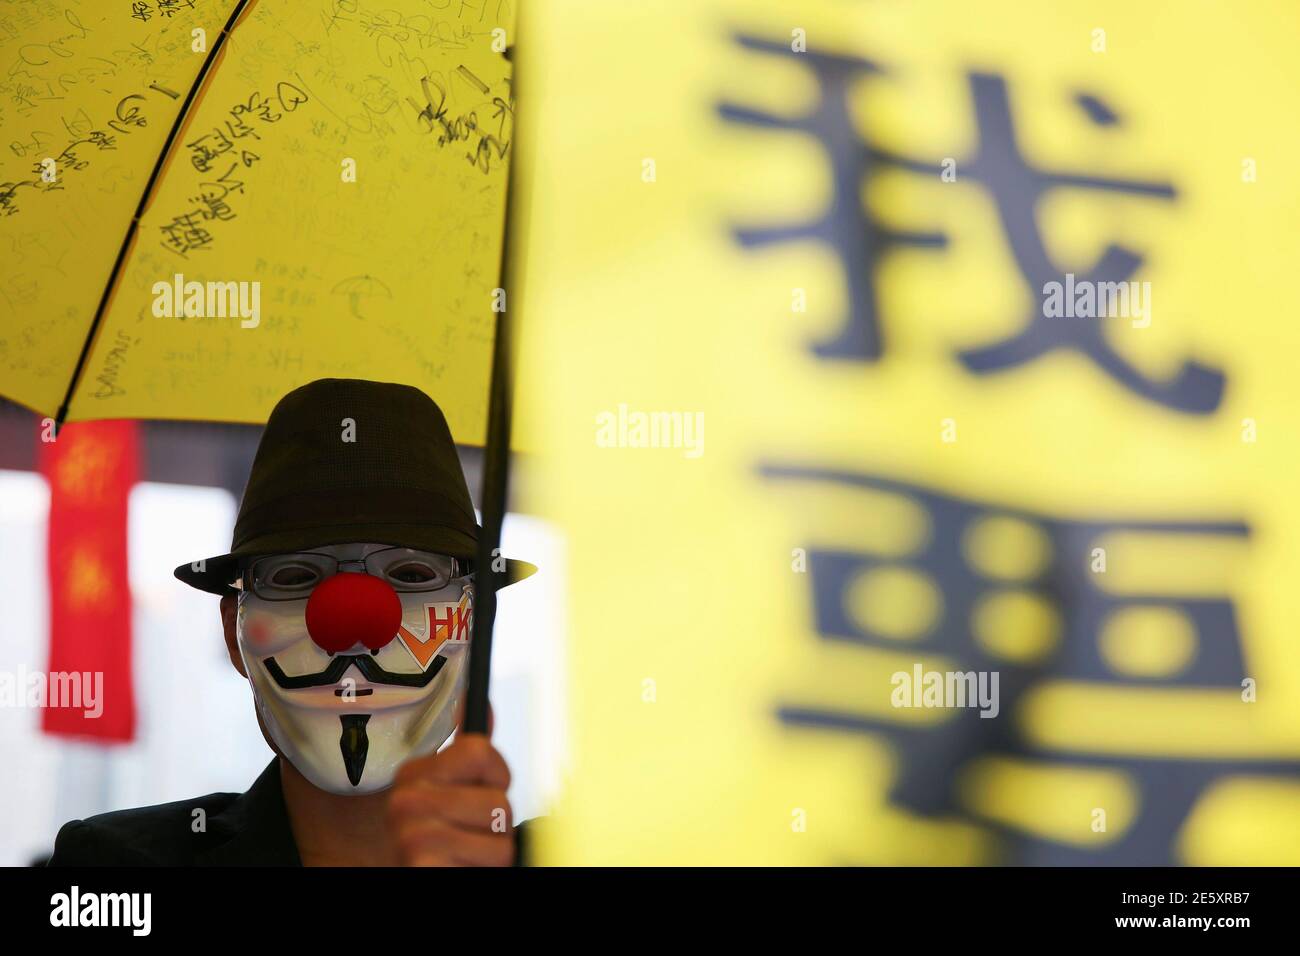 A pro-democracy protester wearing a Guy Fawkes mask holds a yellow umbrella and a banner in the part of Hong Kong's financial central district protesters are occupying November 2, 2014. The former British colony of Hong Kong, which returned to Chinese rule in 1997, has witnessed a month of protests calling on the Beijing-backed government to keep its promise of introducing universal suffrage. The protests have for the most part been peaceful, with occasional clashes between the student-led protesters and Beijing supporters seeking to move them from the streets.   REUTERS/Damir Sagolj (CHINA -  Stock Photo